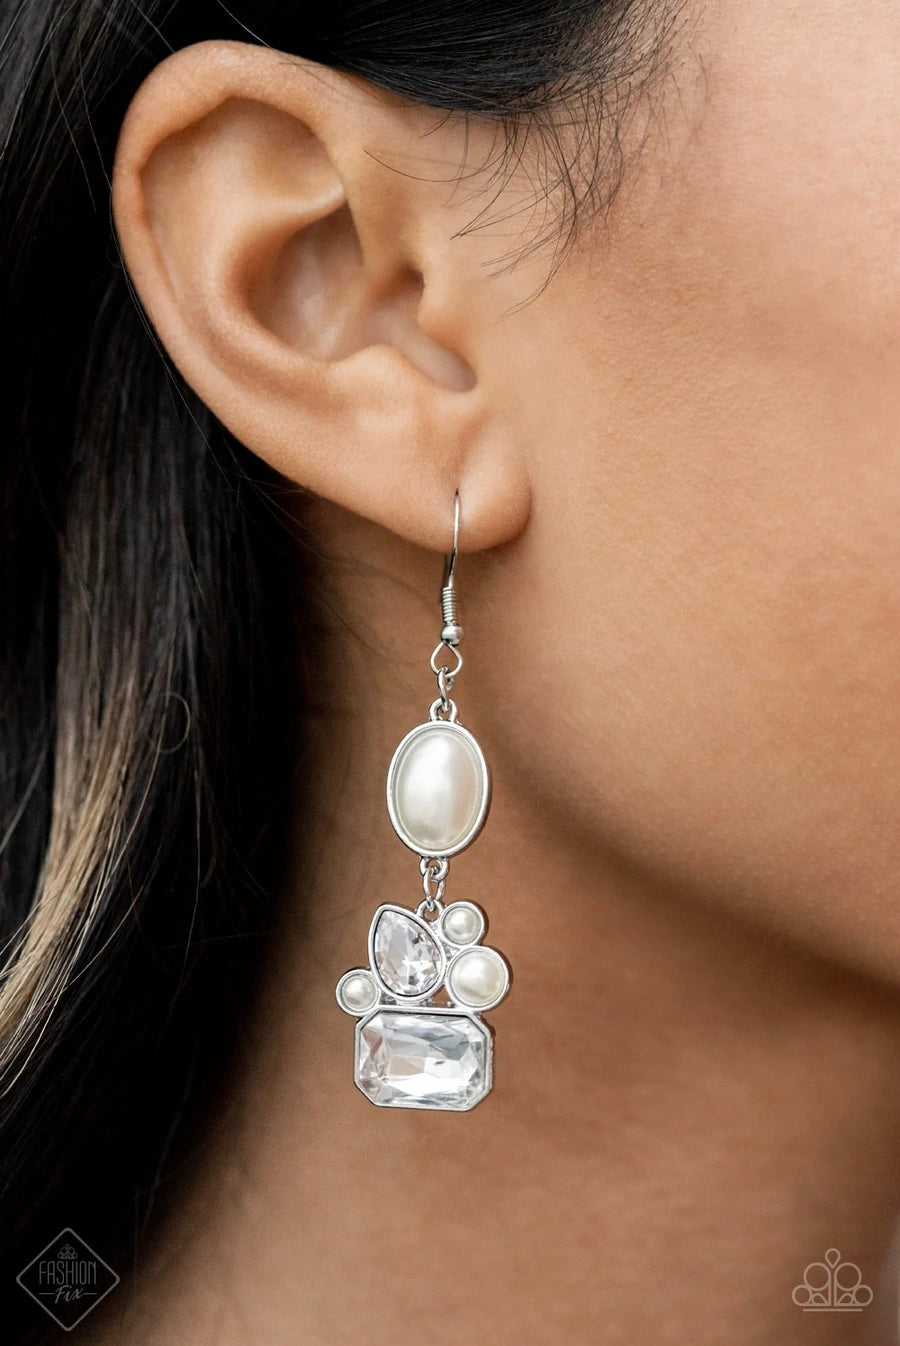 Showtime Twinkle White Earrings - Cindys Bling Boutique